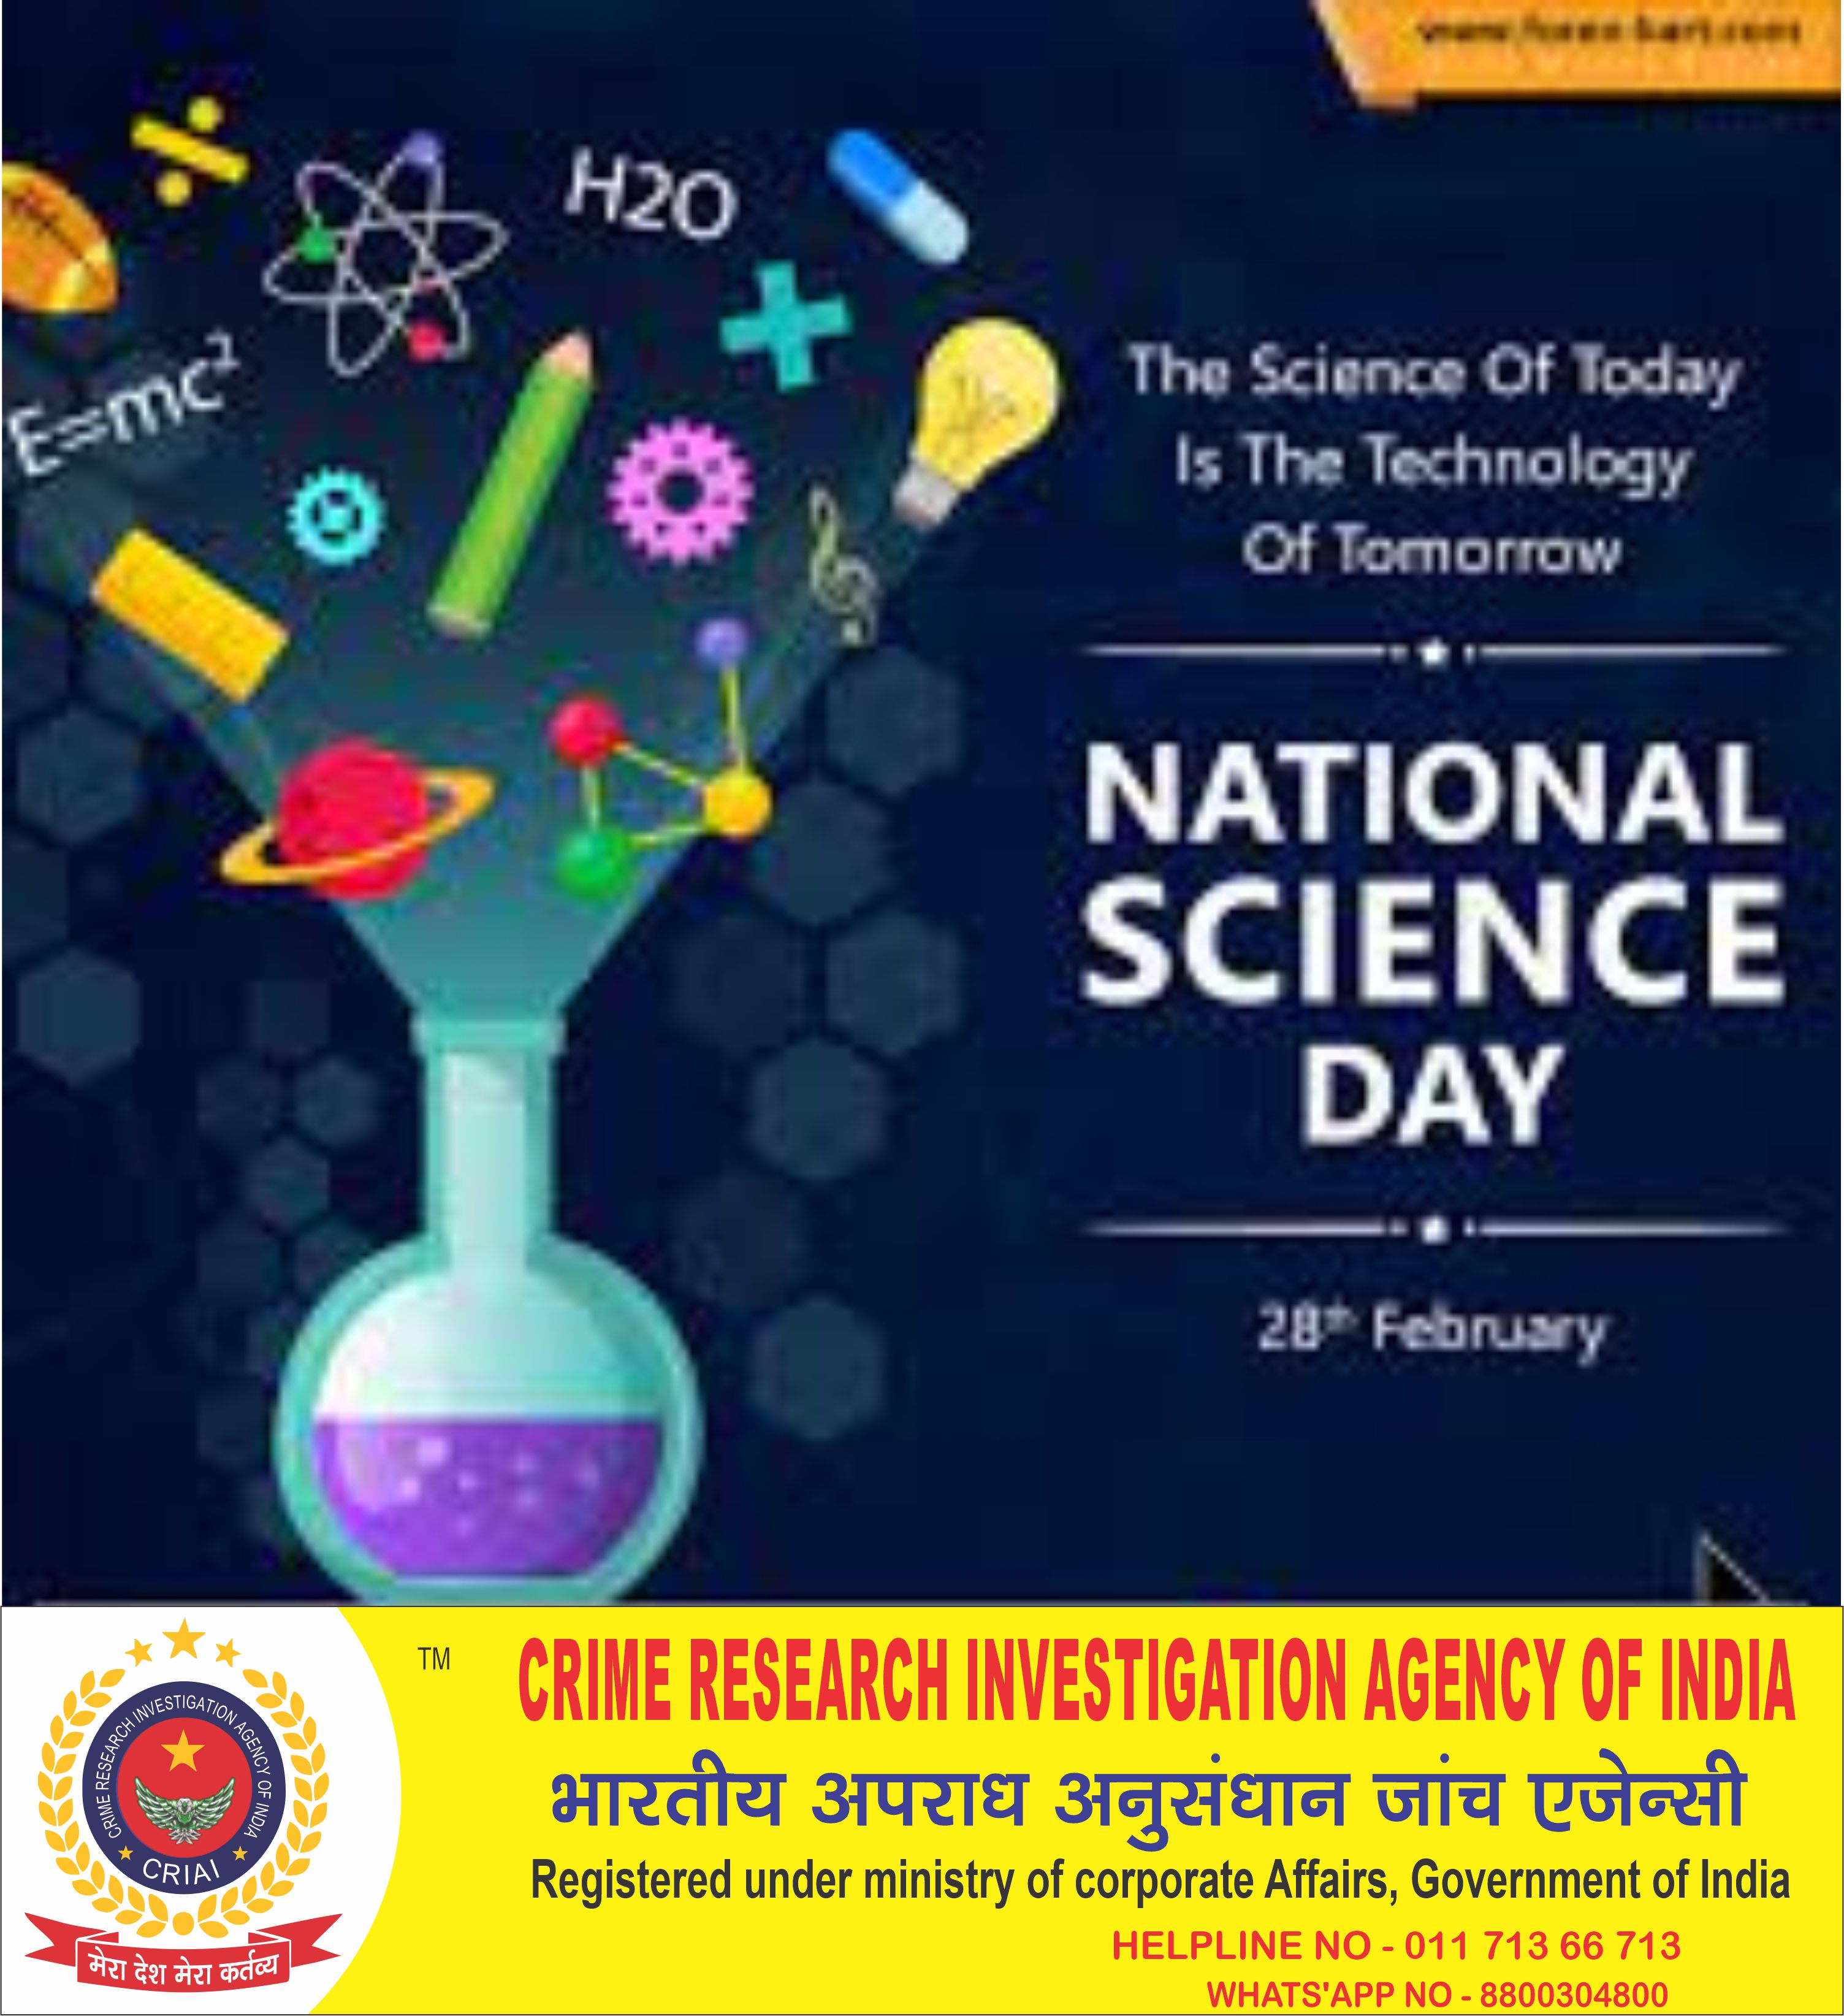 science-contributes-most-progress-of-any-country-national-science-day